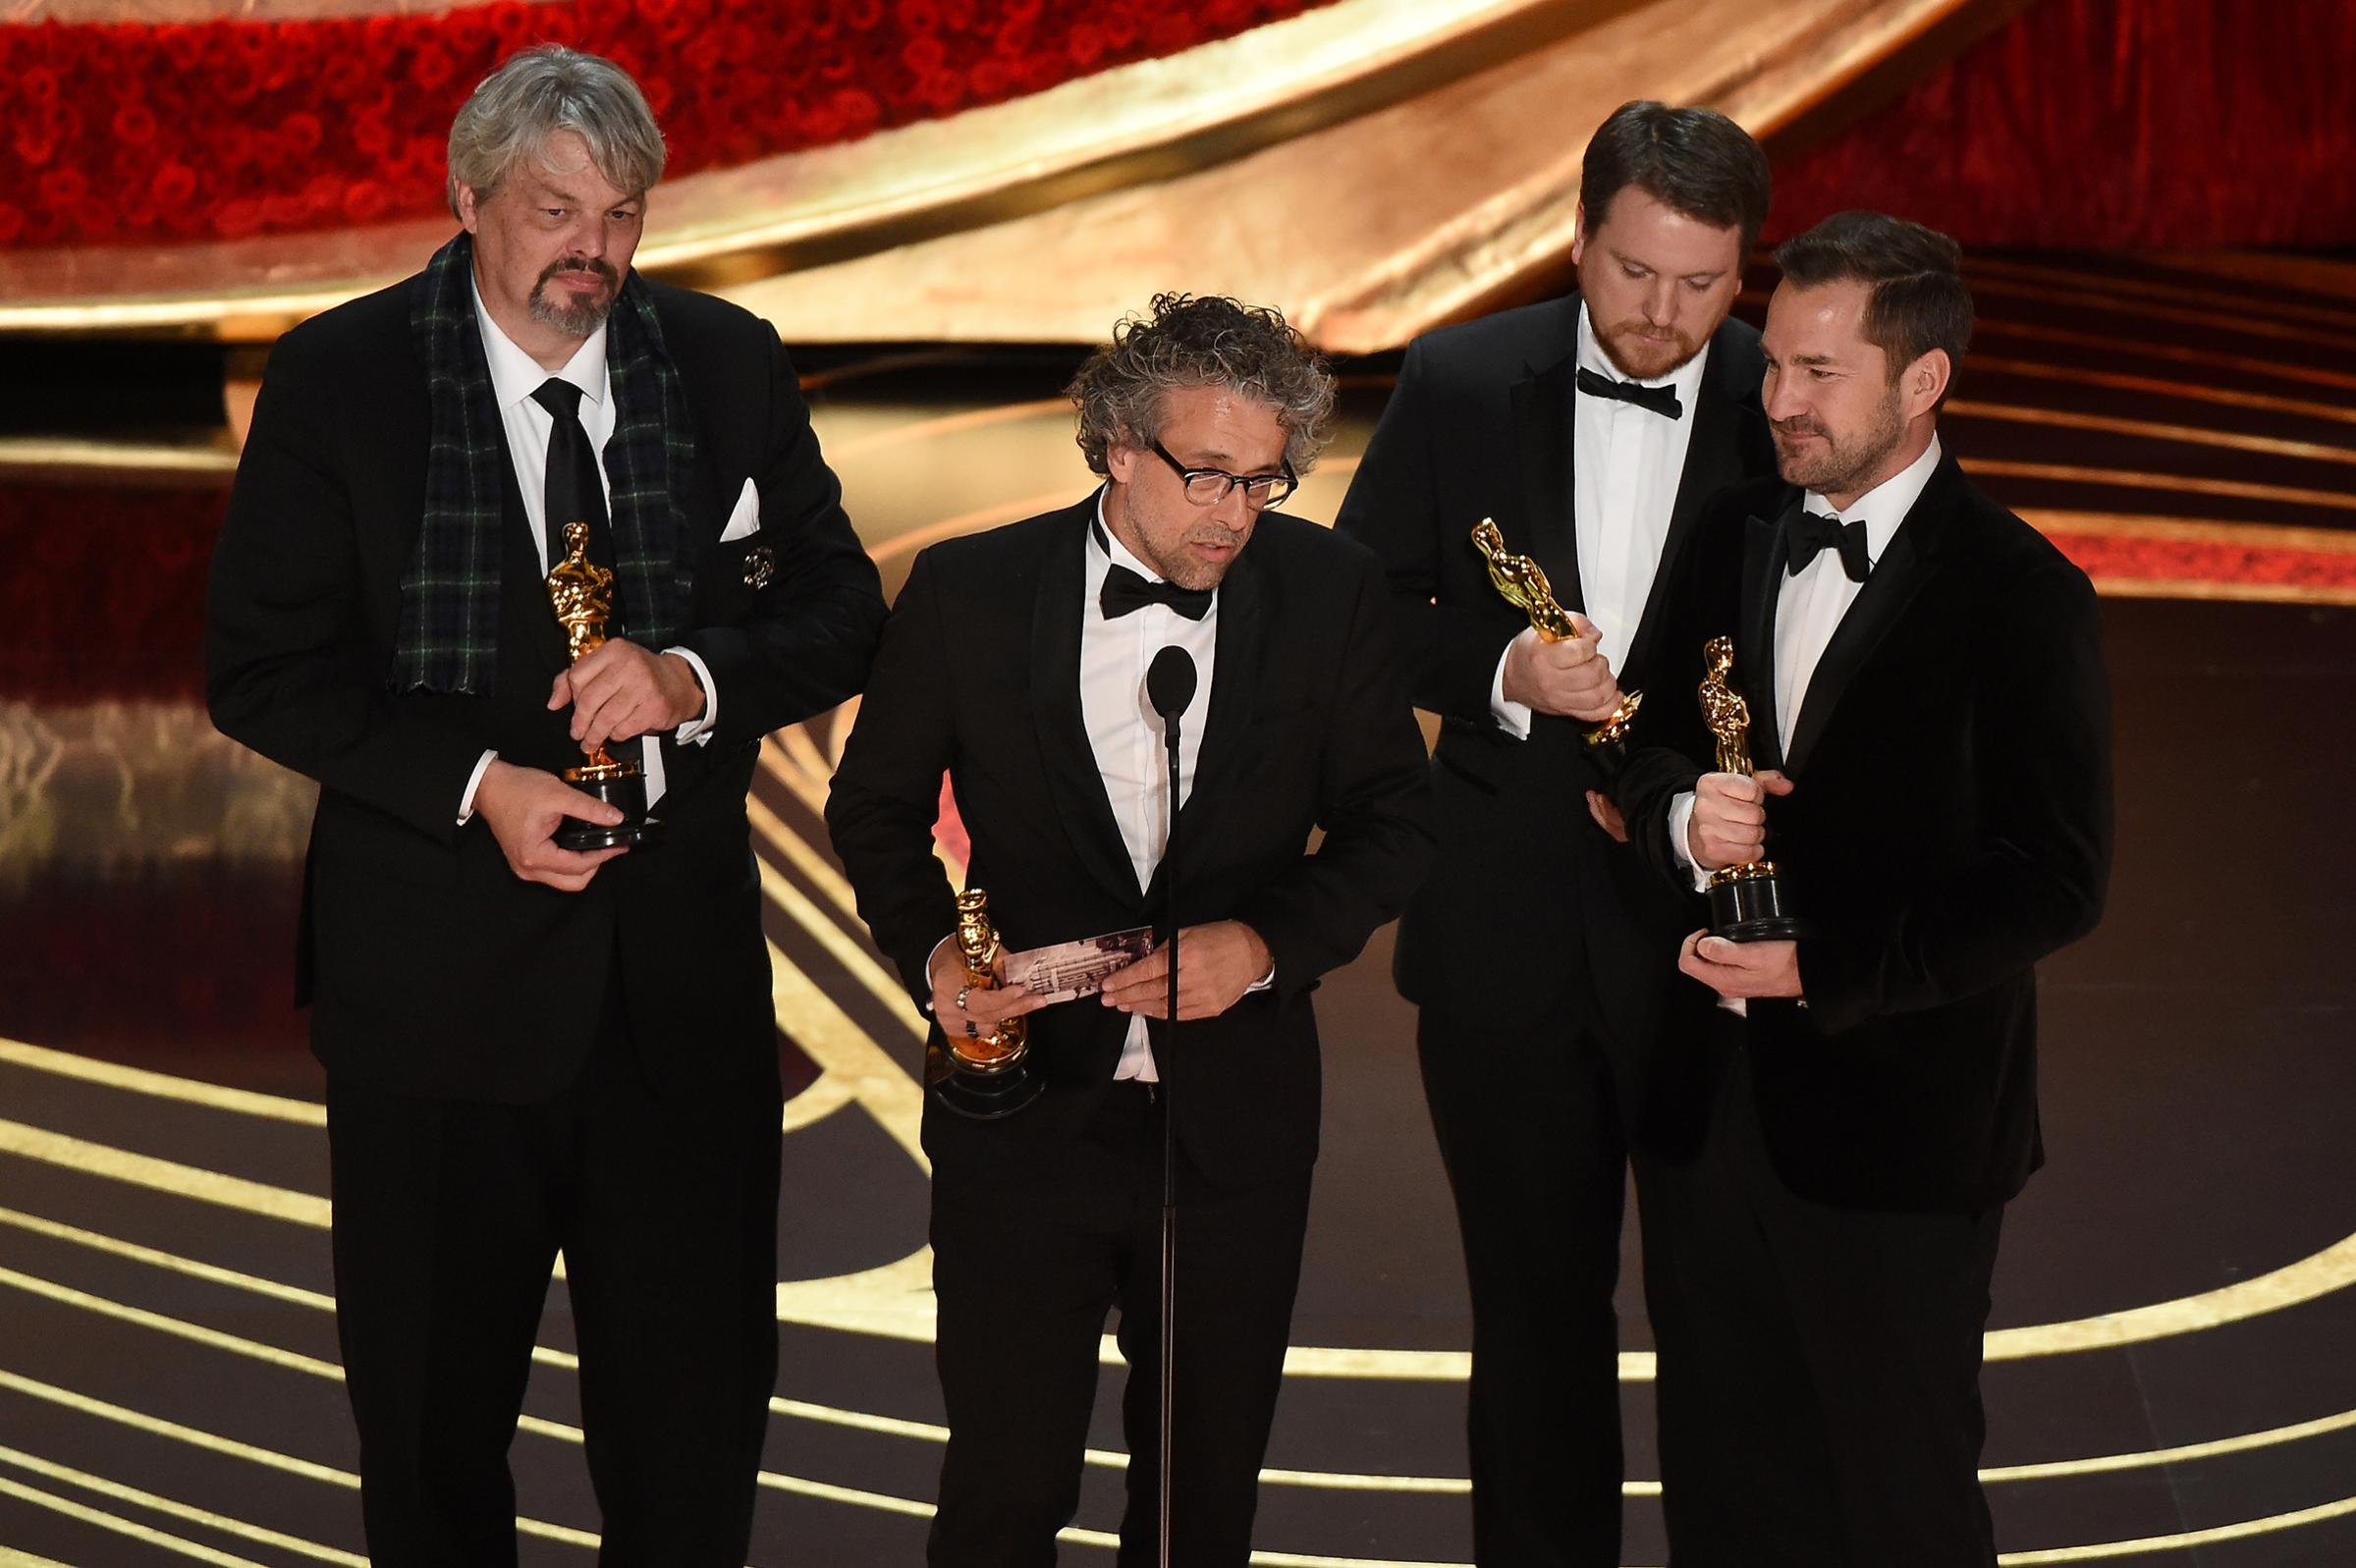 Best Visual Effects nominees for "First Man" Paul Lambert, Ian Hunter, Tristan Myles and J.D. Schwalm accept the award for Best Visual Effects during the 91st Annual Academy Awards at the Dolby Theatre in Hollywood, California on Feb. 24, 2019.